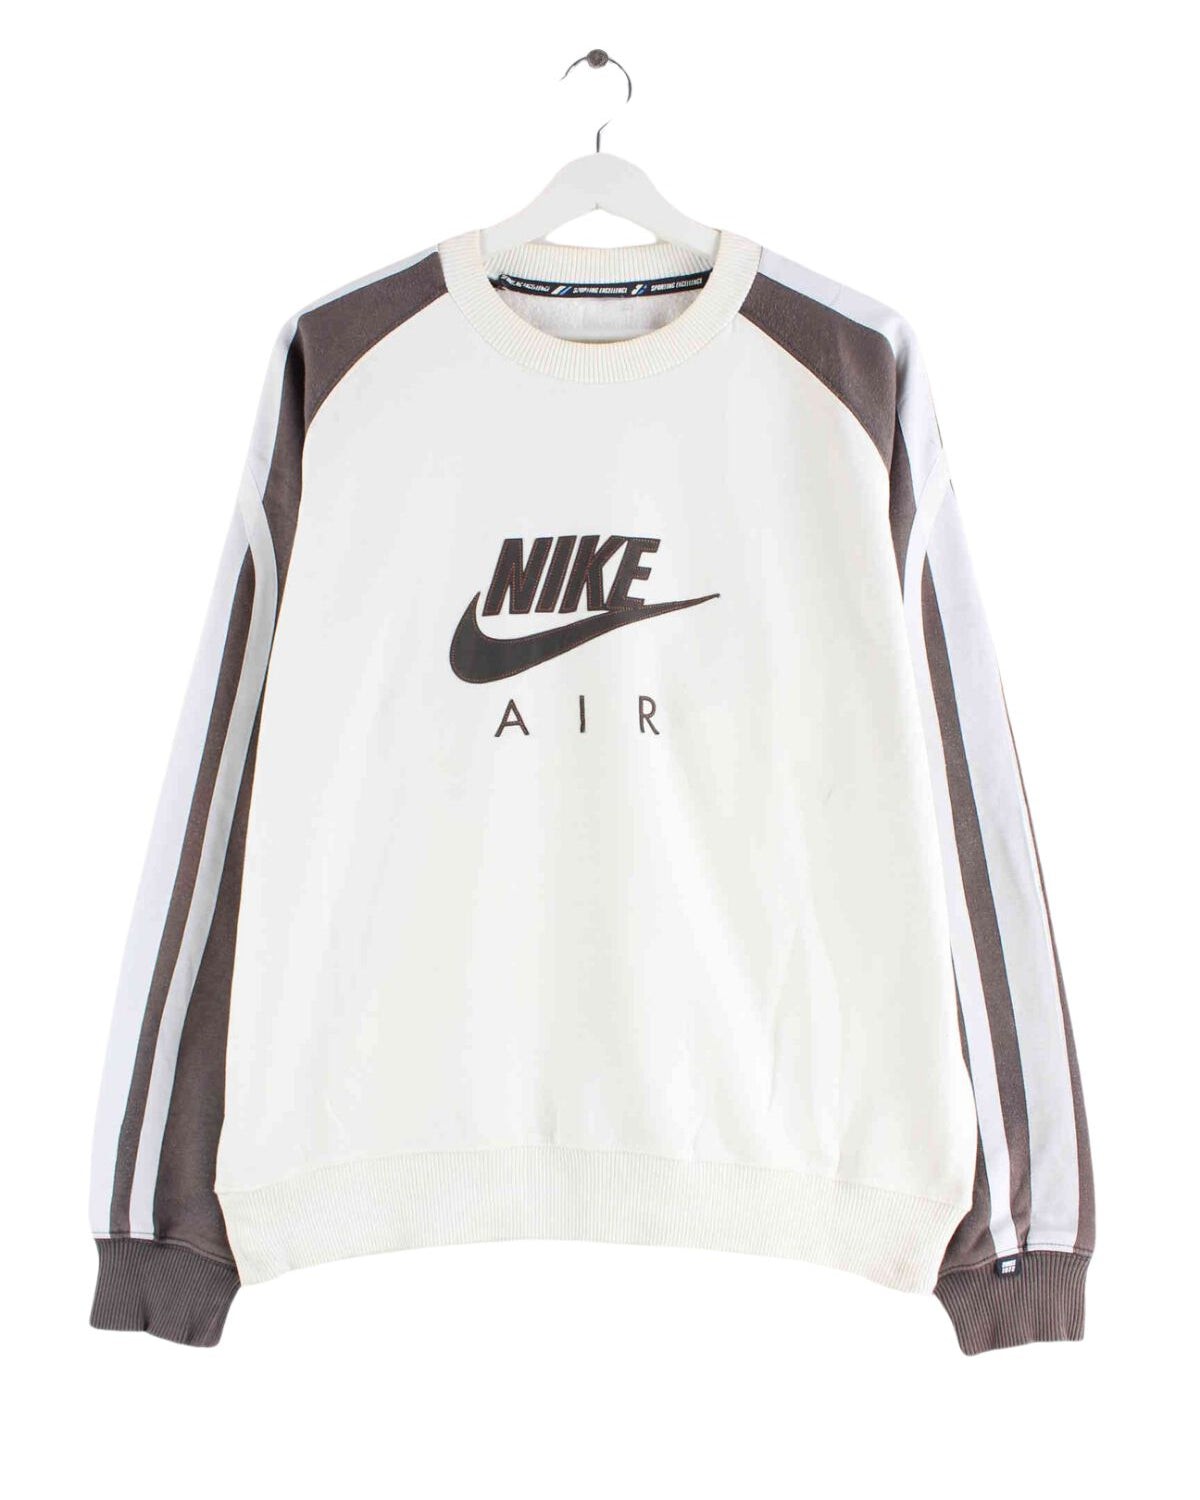 Nike Air y2k Embroidered Sweater Beige S (front image)